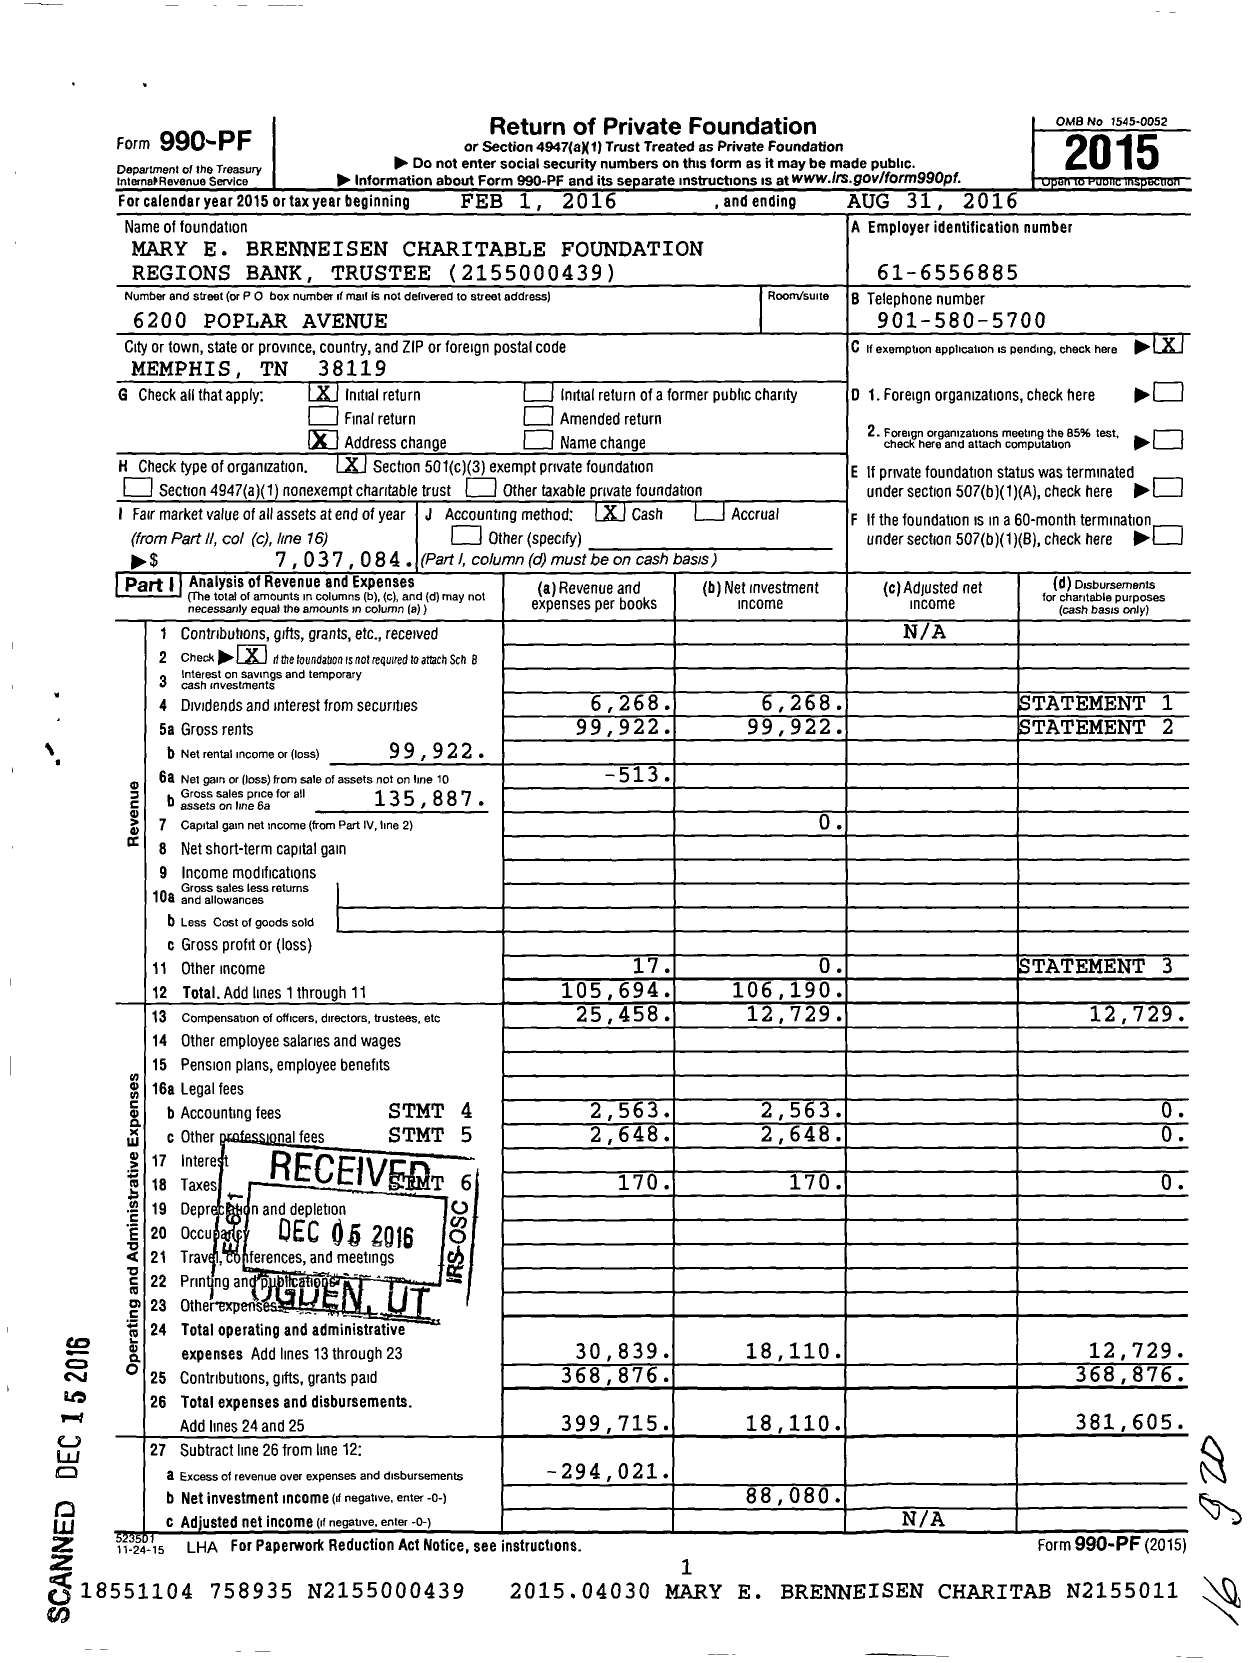 Image of first page of 2015 Form 990PF for Mary E Brenneisen Charitable Foundation Regions Bank Trustee